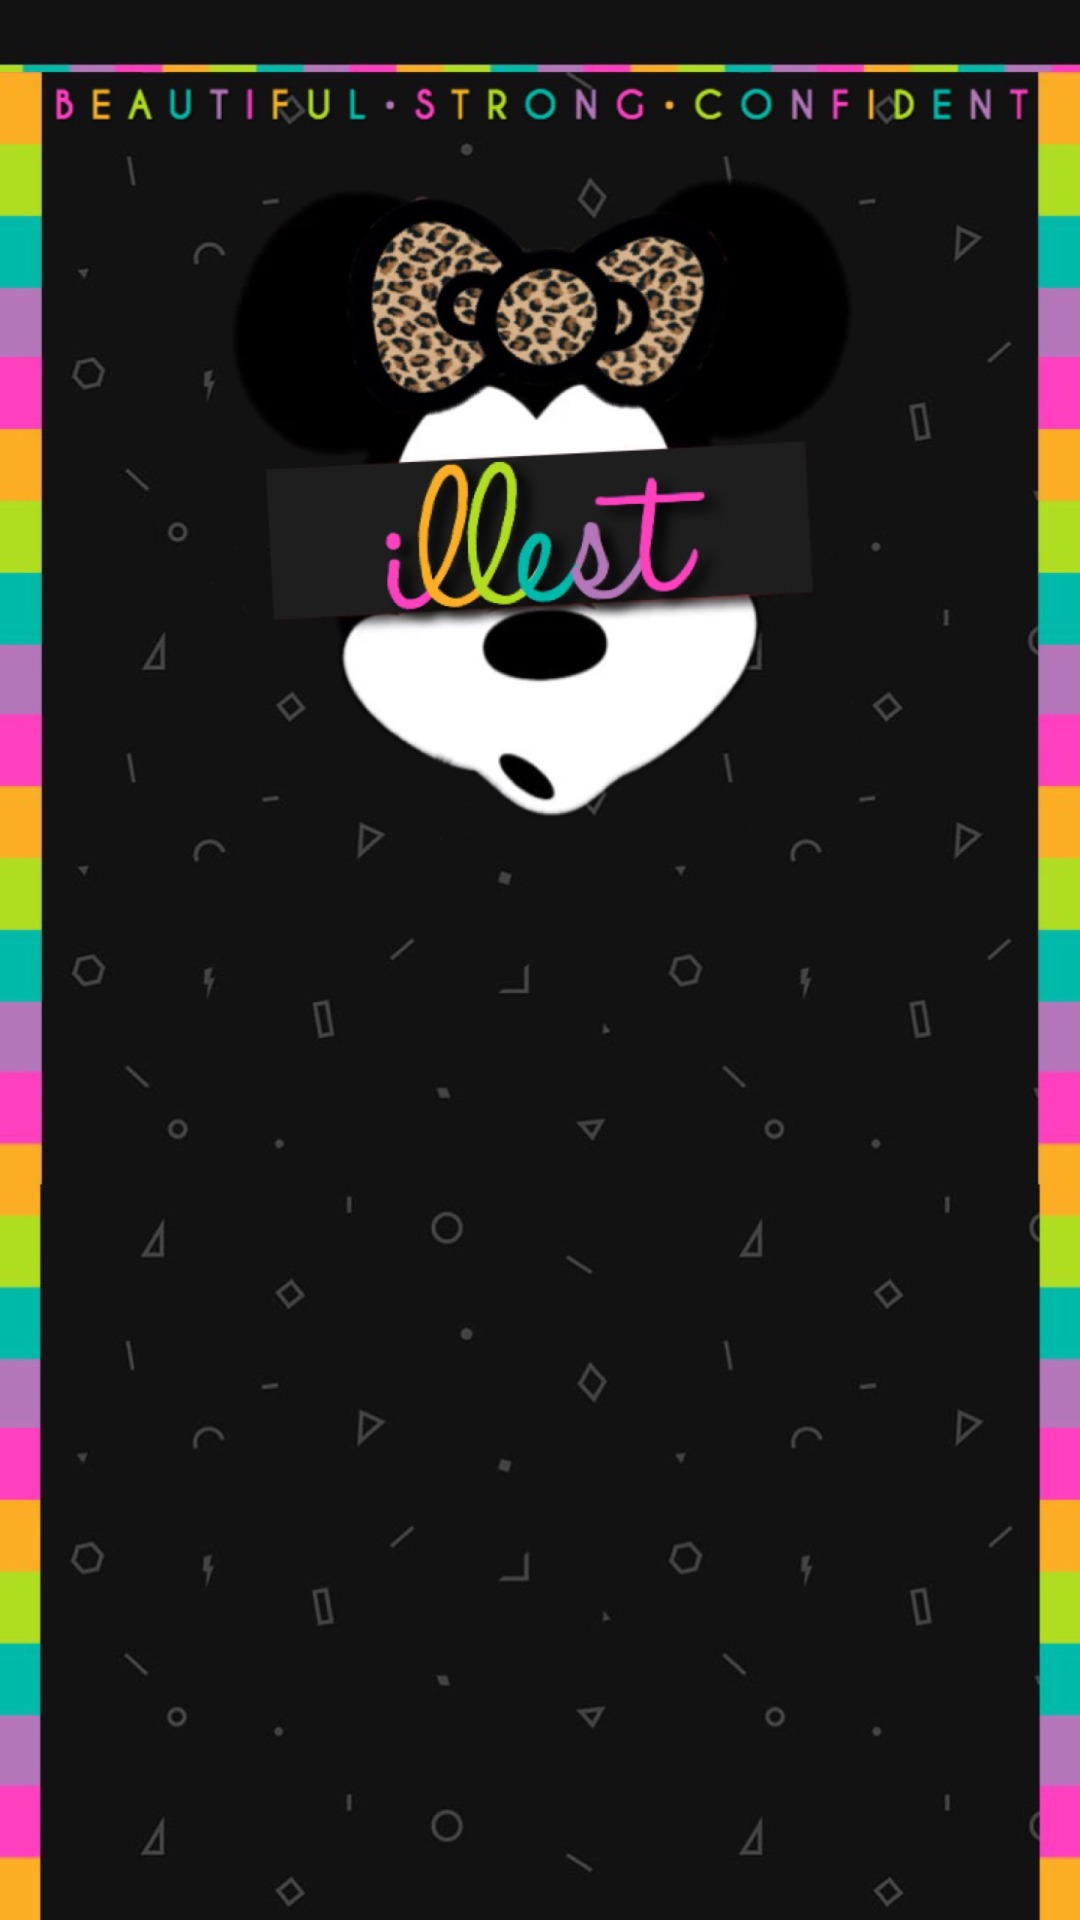 Minnie Mouse Illest Wallpaper Made By Me 💁🏻💖 Please - Cute Mickey Mouse Wallpapers For Iphones - HD Wallpaper 